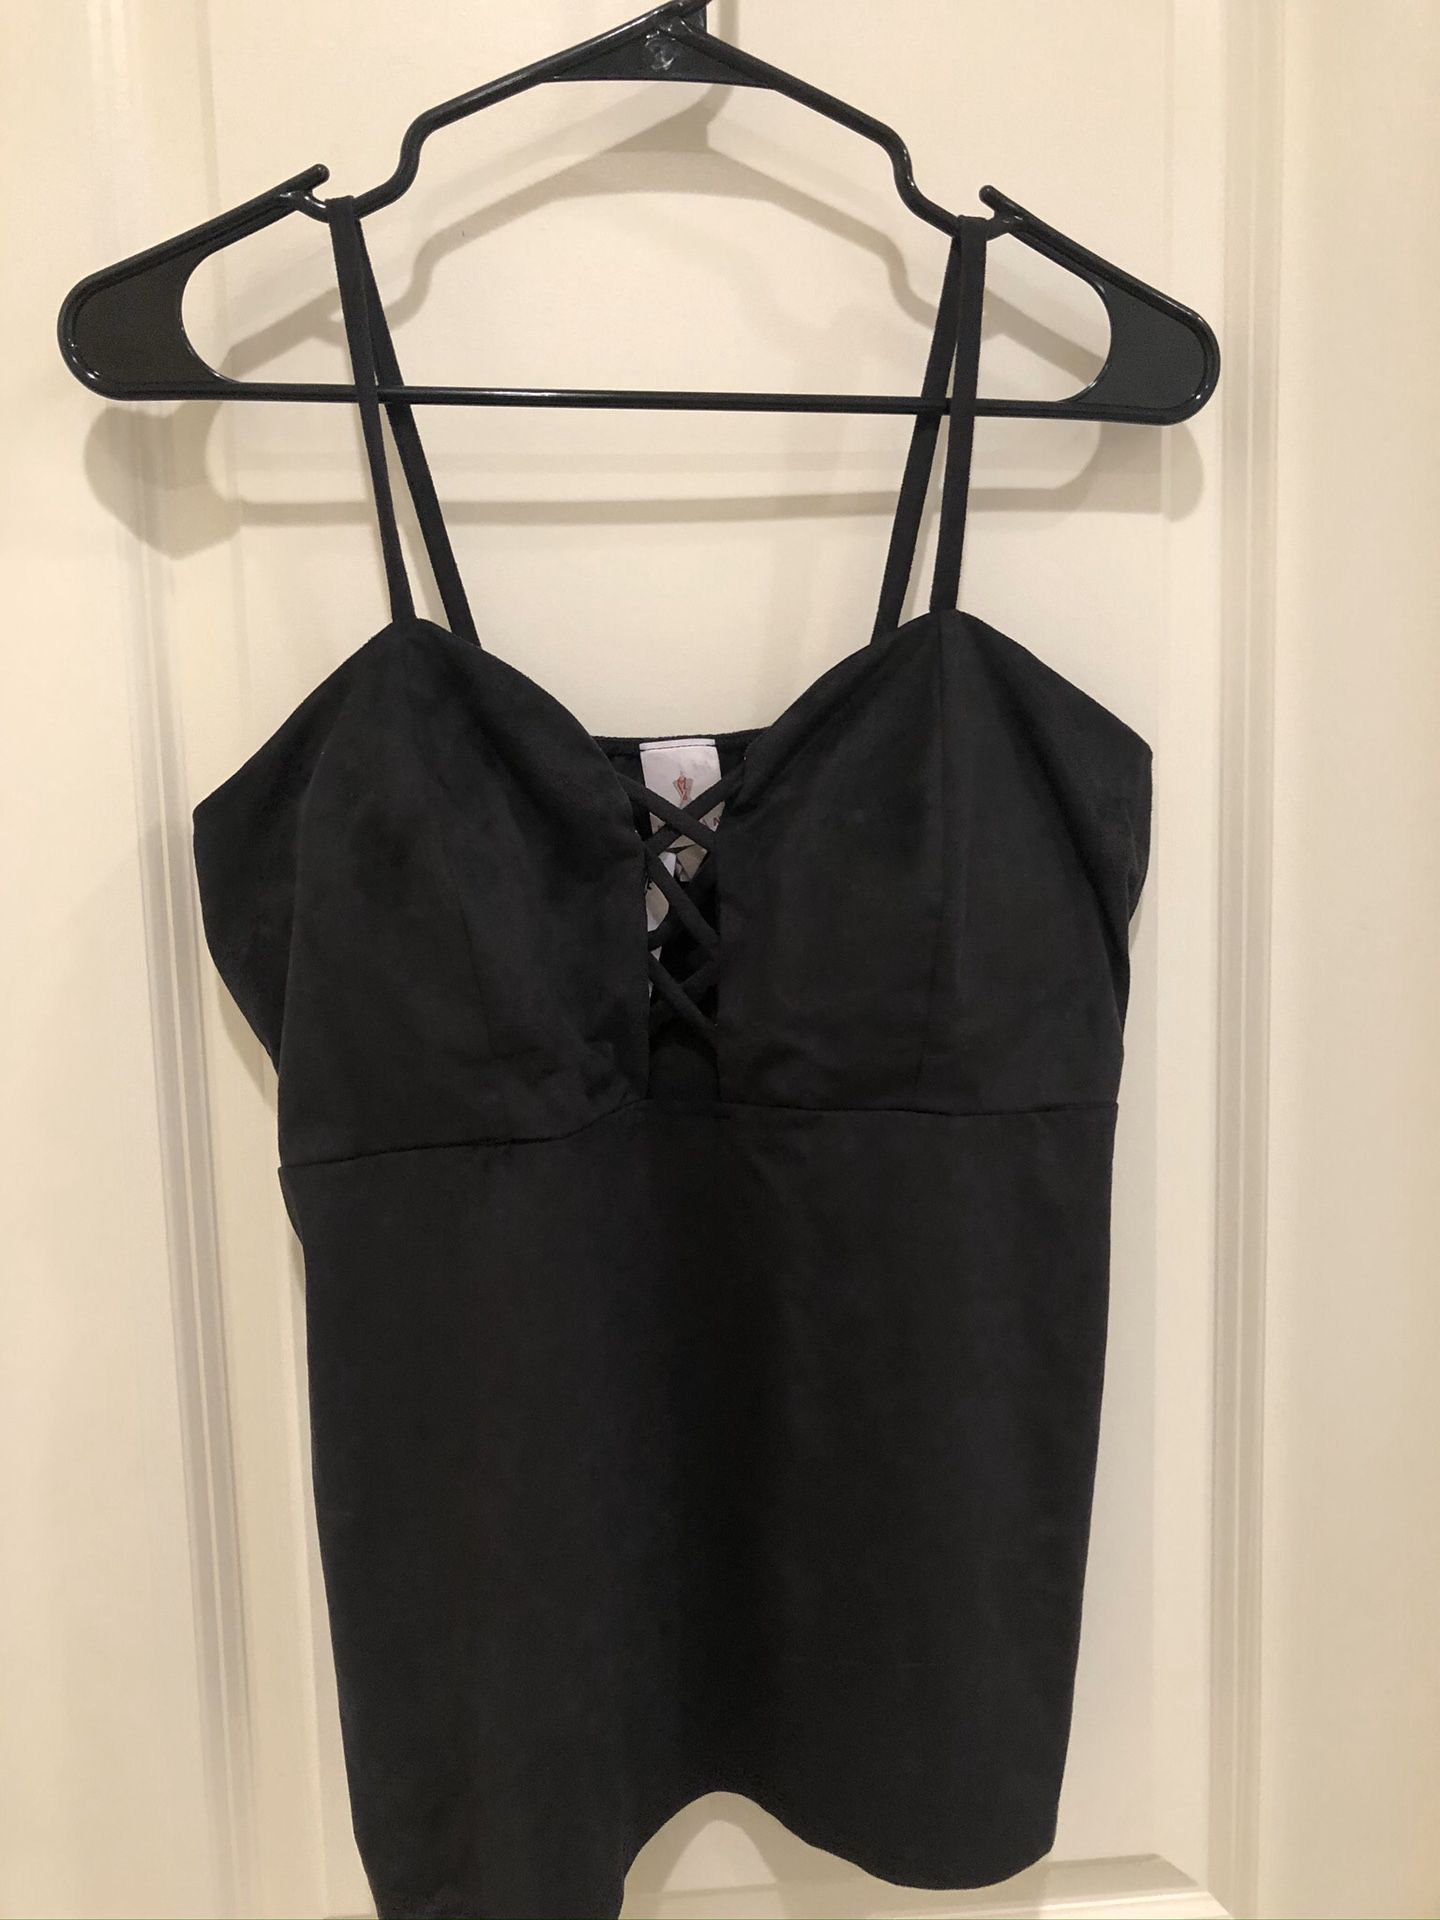 G-stage - black top - size 1X